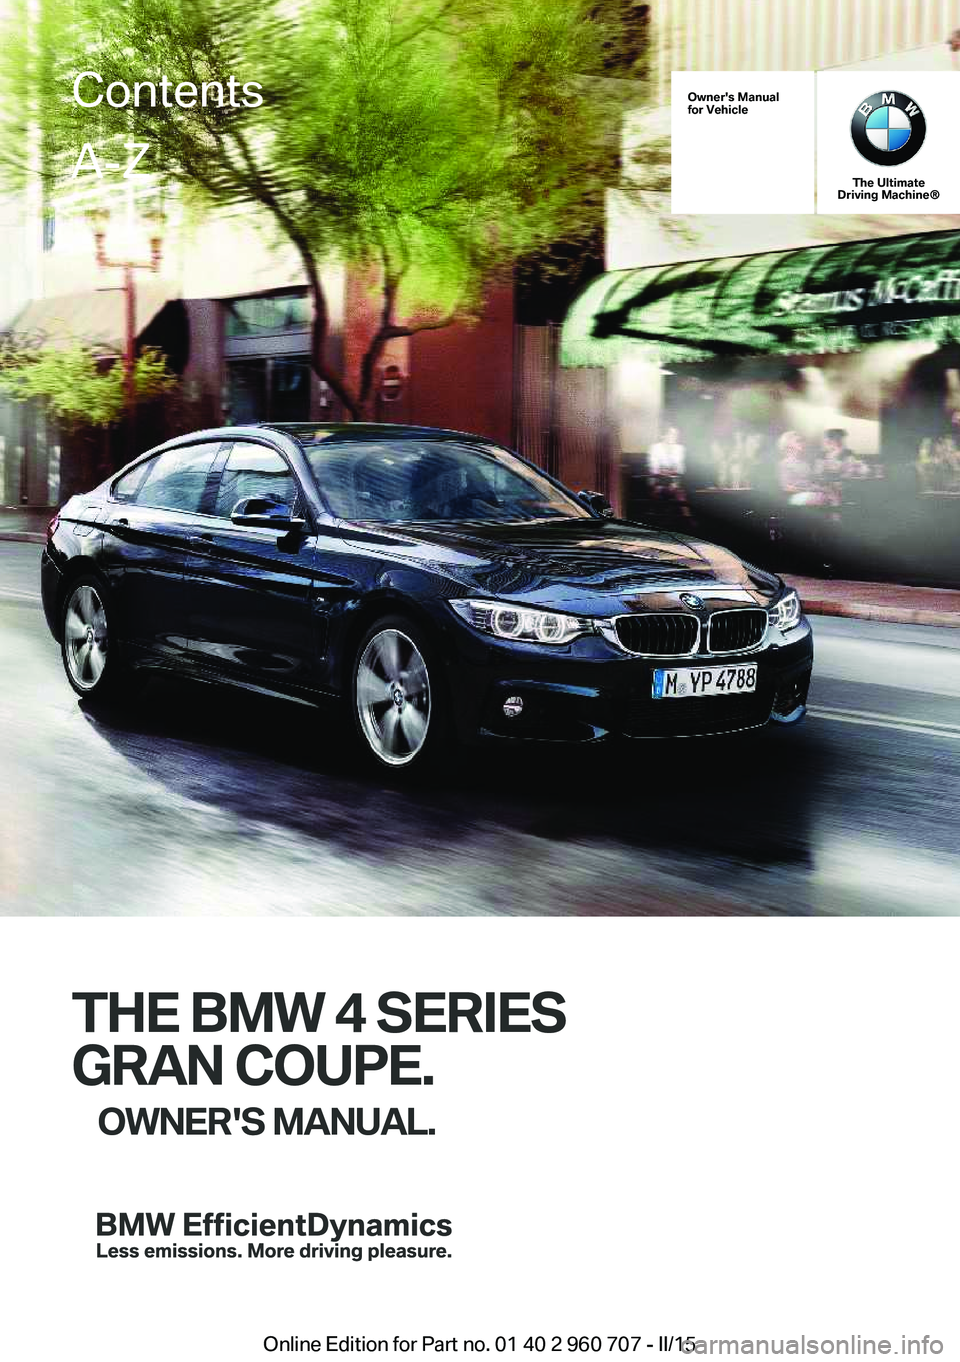 BMW 428I XDRIVE  GRAN COUPE 2015  Owners Manual Owner's Manual
for Vehicle
The Ultimate
Driving Machine®
THE BMW 4 SERIES
GRAN COUPE. OWNER'S MANUAL.
ContentsA-Z
Online Edition for Part no. 01 40 2 960 707 - II/15   